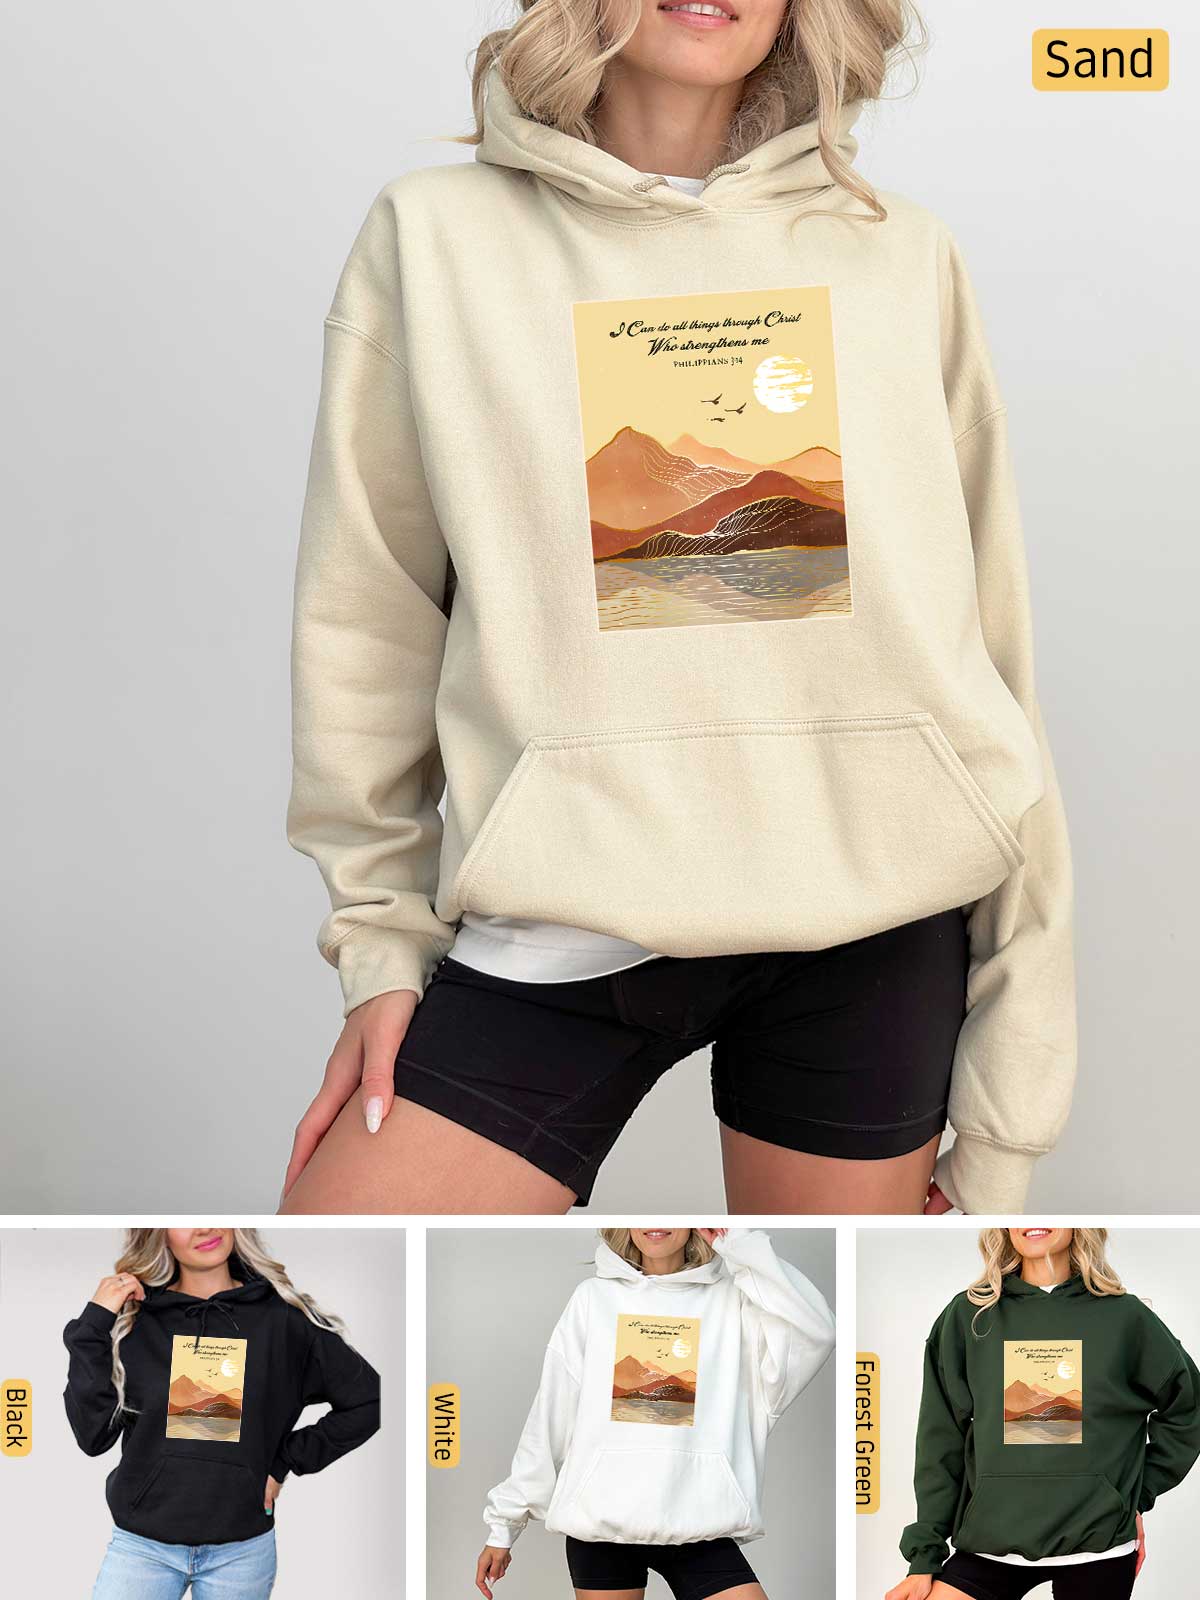 a woman wearing a sweatshirt with a picture on it